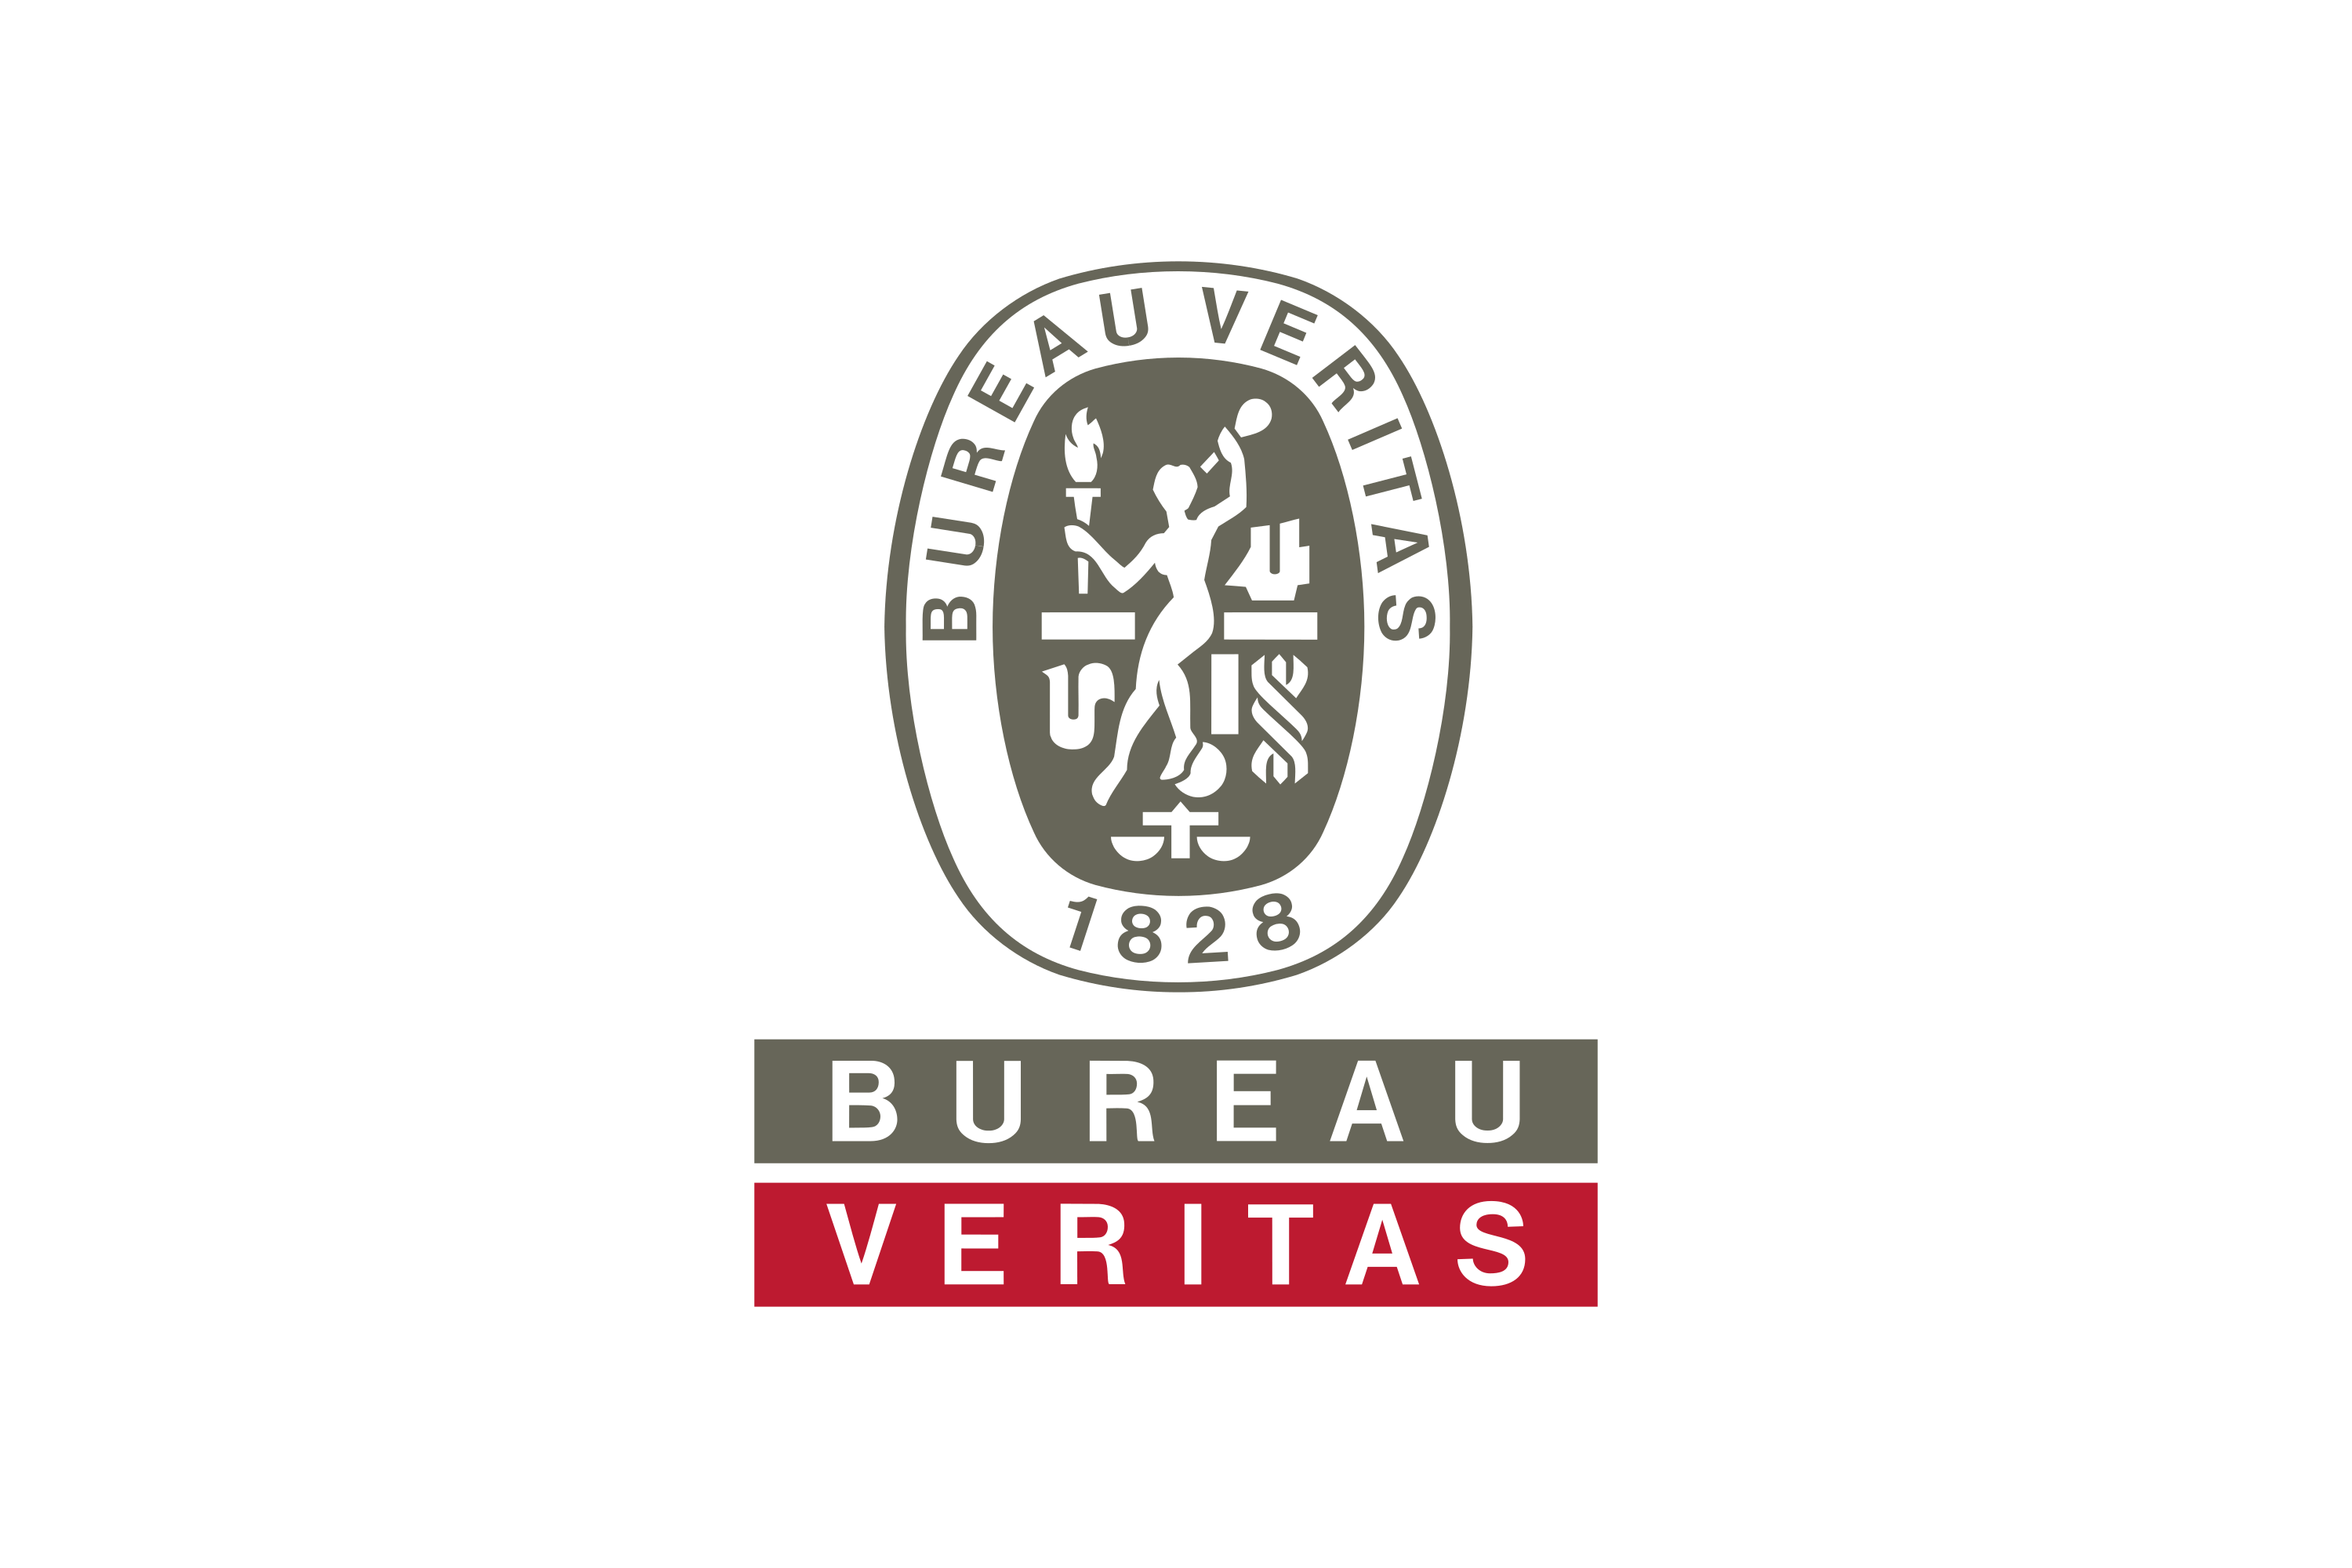 Appraisal Contract: Evaluation of the Mobile Assets of Automotive Supplier  Veritas AG - Lueders & Partner GmbH